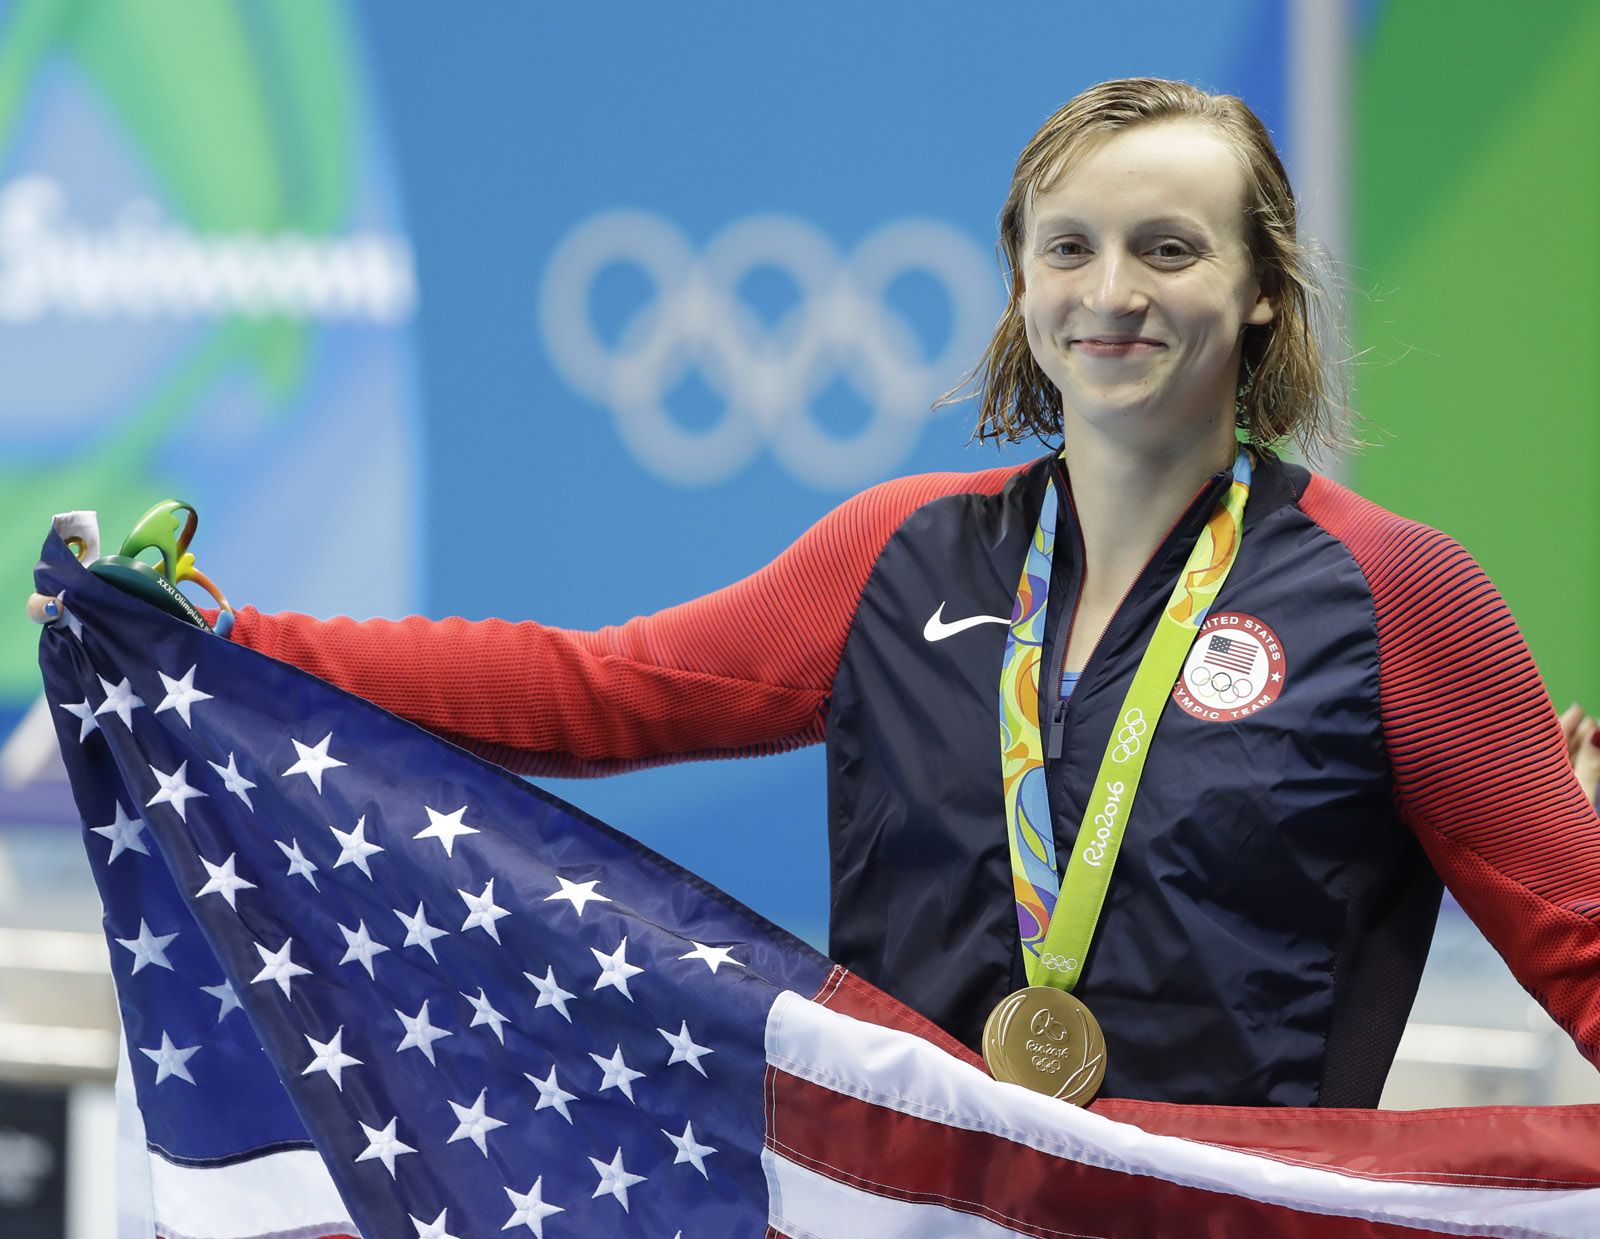 Winner United States' Katie Ledecky, celebrates with her medal after the women's 400-meter freestyle during the swimming competitions at the 2016 Summer Olympics, Monday, Aug. 8, 2016, in Rio de Janeiro, Brazil. (AP Photo/Matt Slocum)